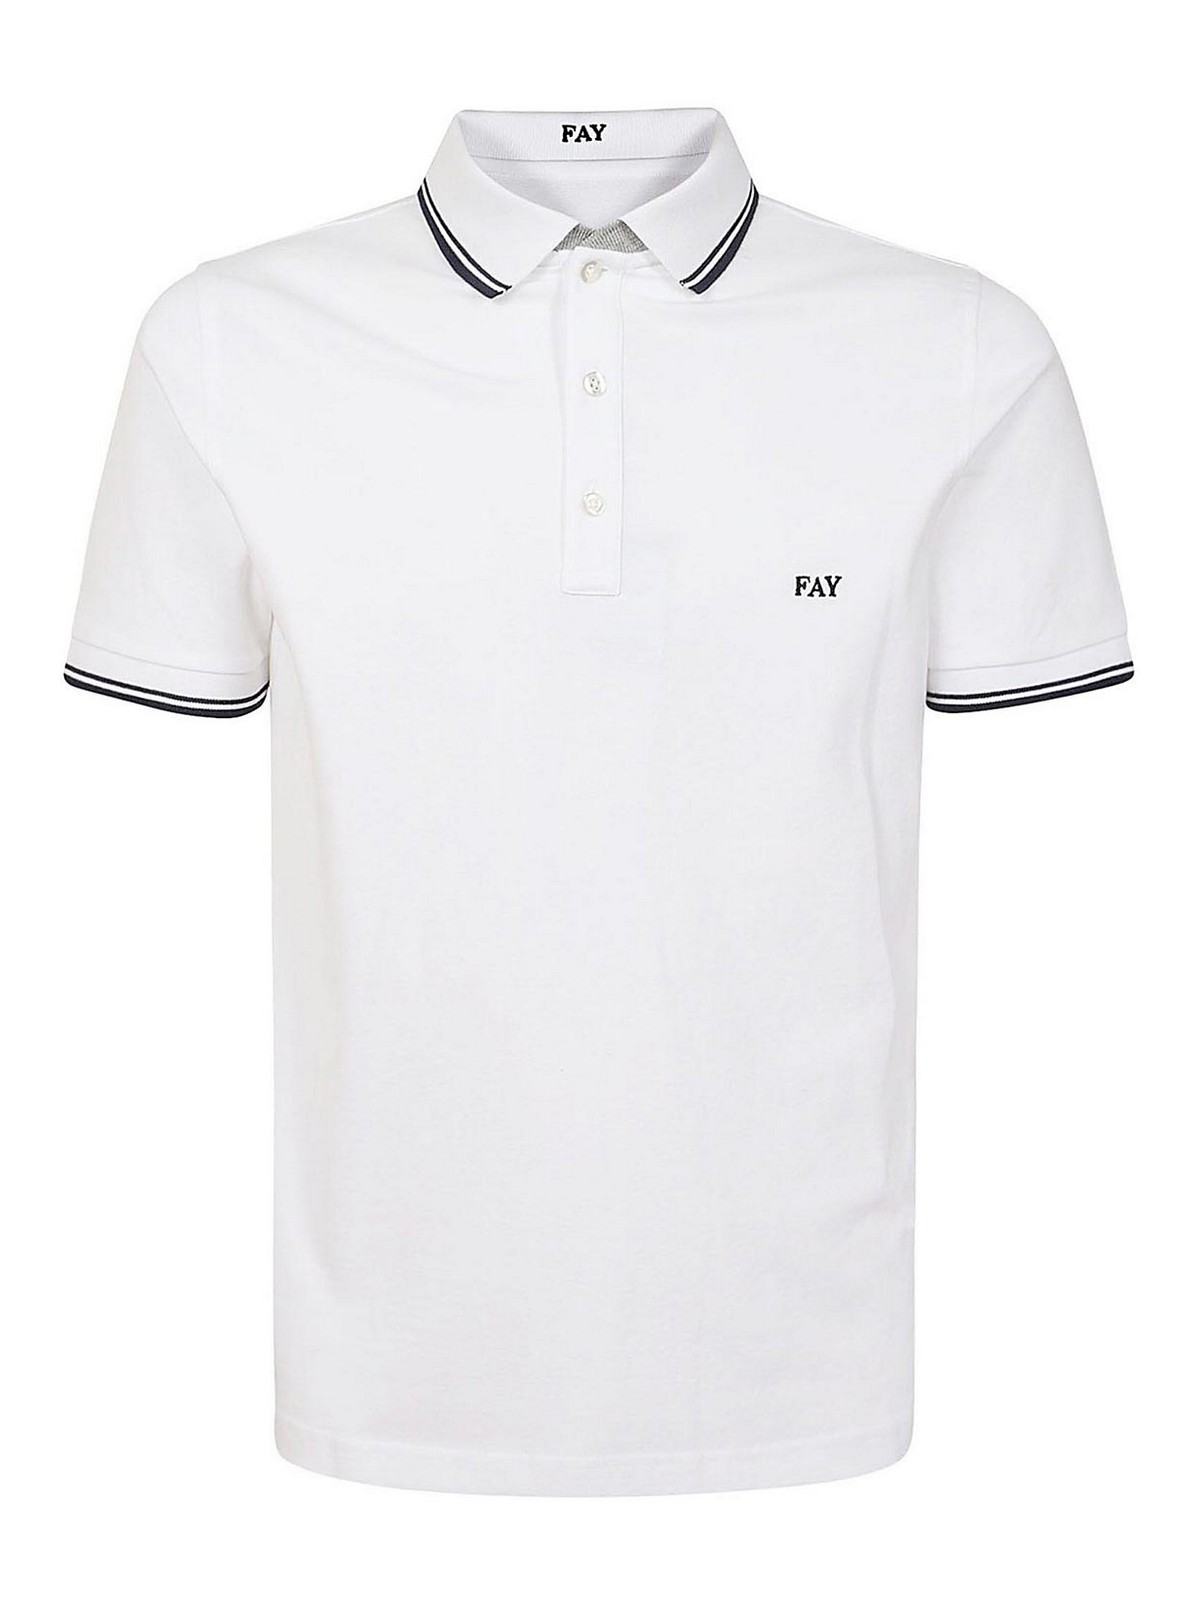 Fay Piquet Stretch Contry Club Polo Shirt In White